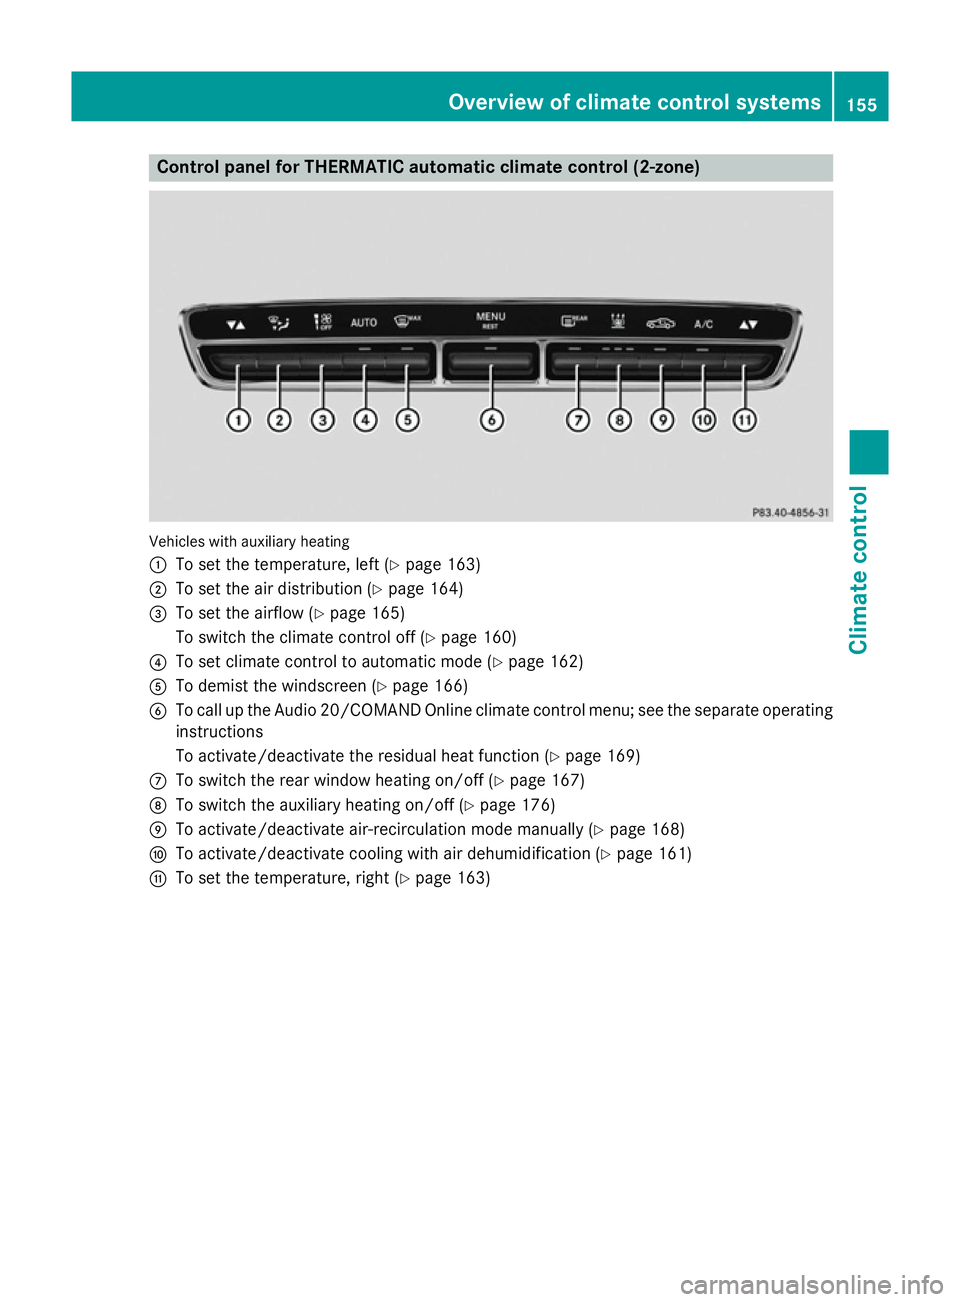 MERCEDES-BENZ C-CLASS ESTATE 2014  Owners Manual Control panel for THERMATIC automatic climate control (2-zone)
Vehicles with auxiliary heating
:
To set the temperature, left (Y page 163)
; To set the air distribution (Y page 164)
= To set the airfl